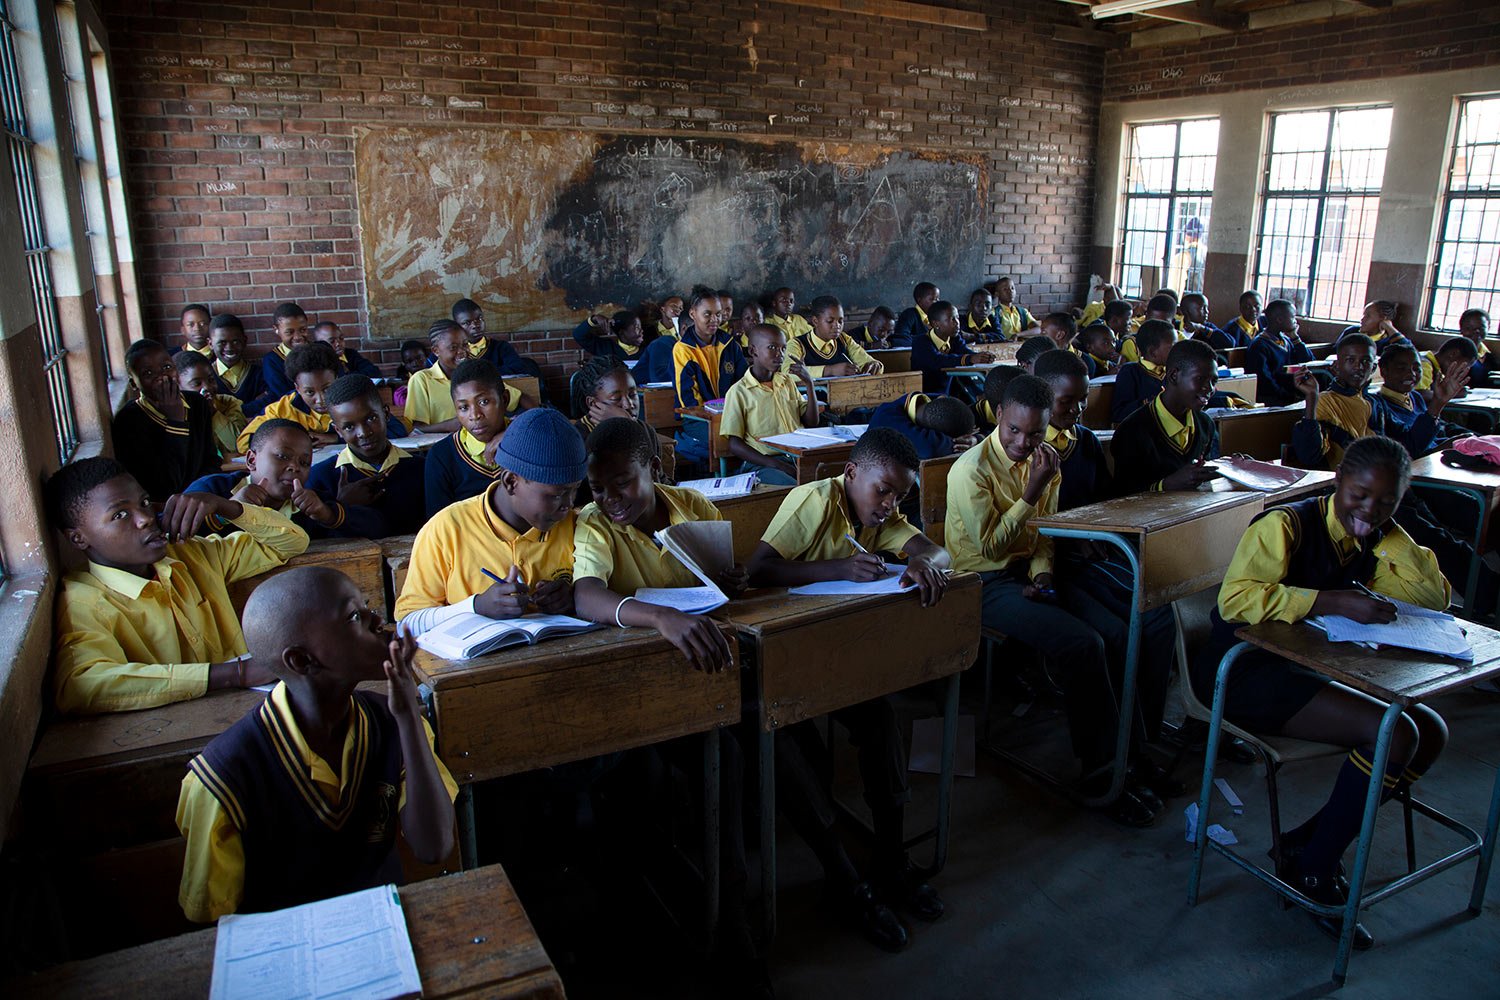  Students attend a class at the Seipone Secondary School in the rural village of Ga-Mashashane, near Polokwane, South Africa, Thursday, May 4, 2023. (AP Photo/Denis Farrell) 